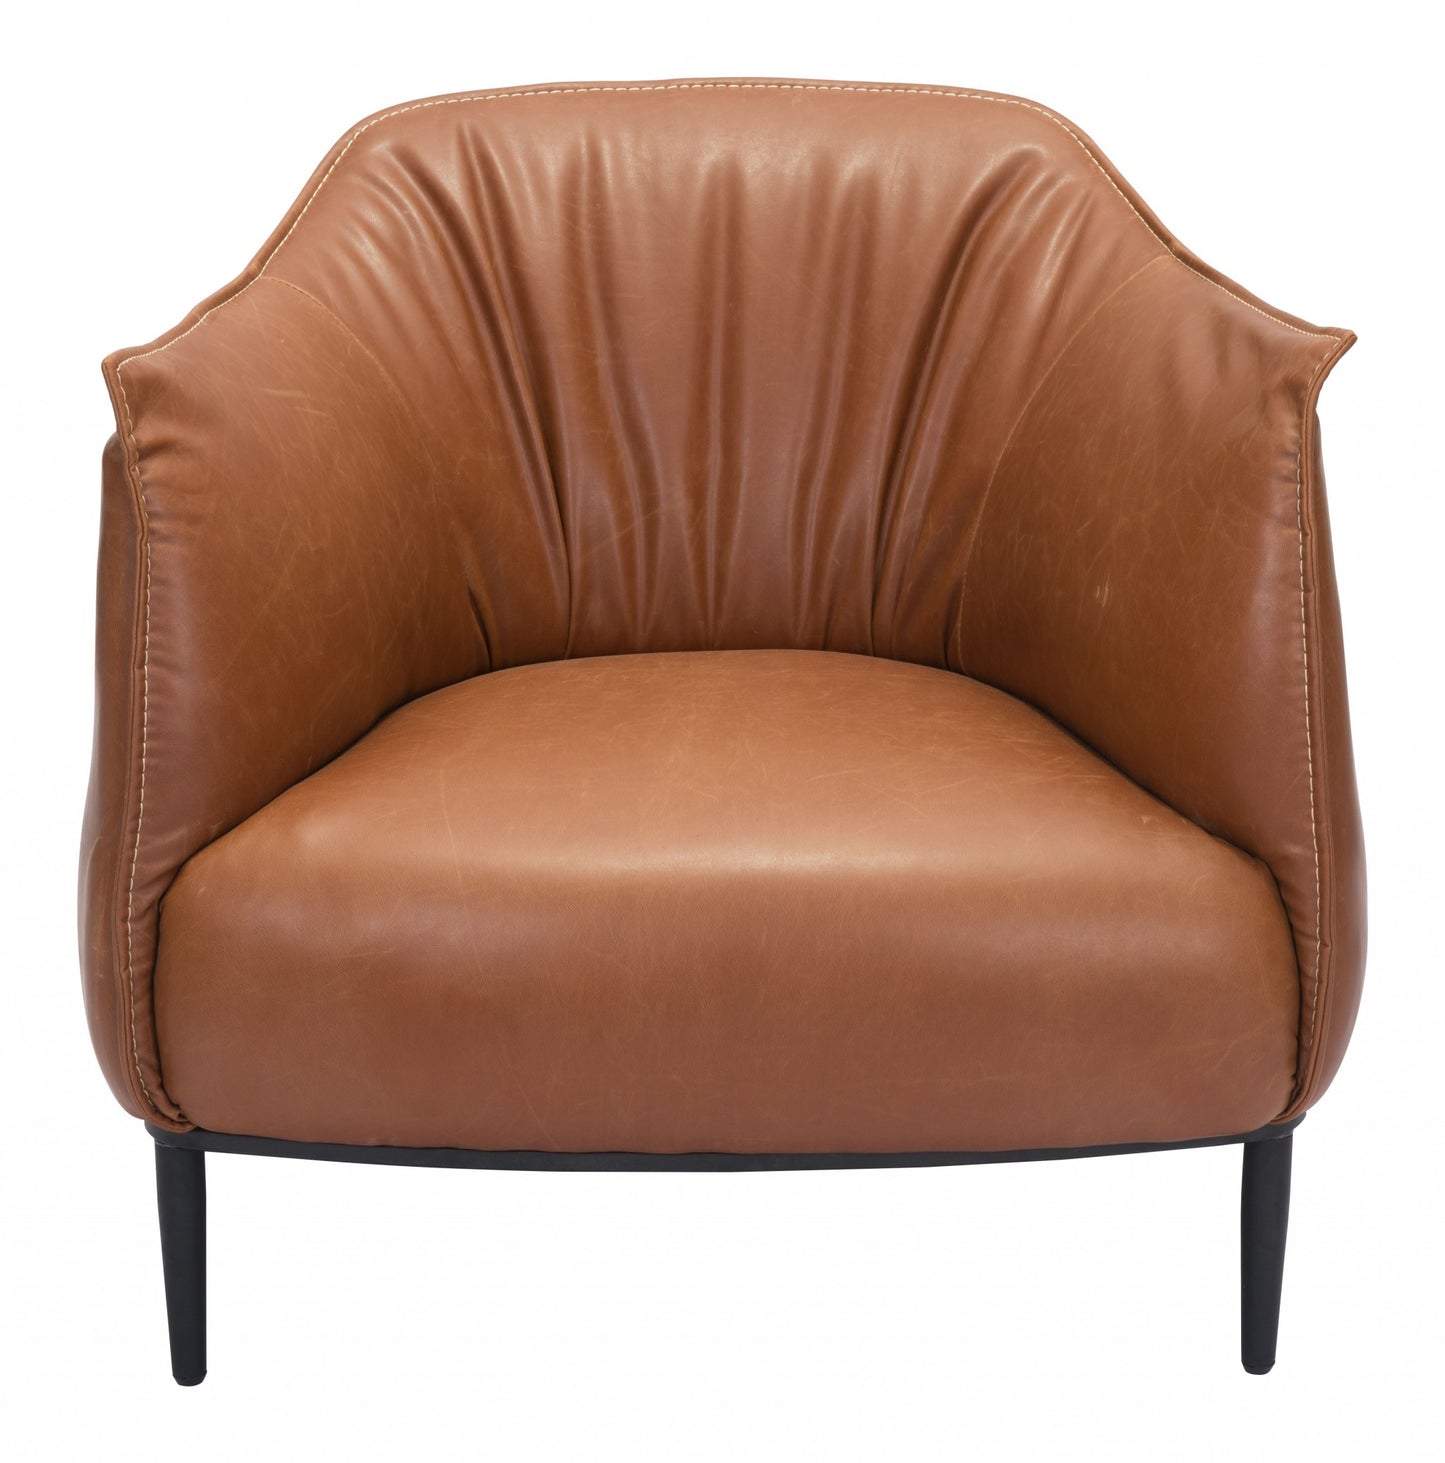 35" Coffee And Brown Faux Leather Barrel Chair By Homeroots